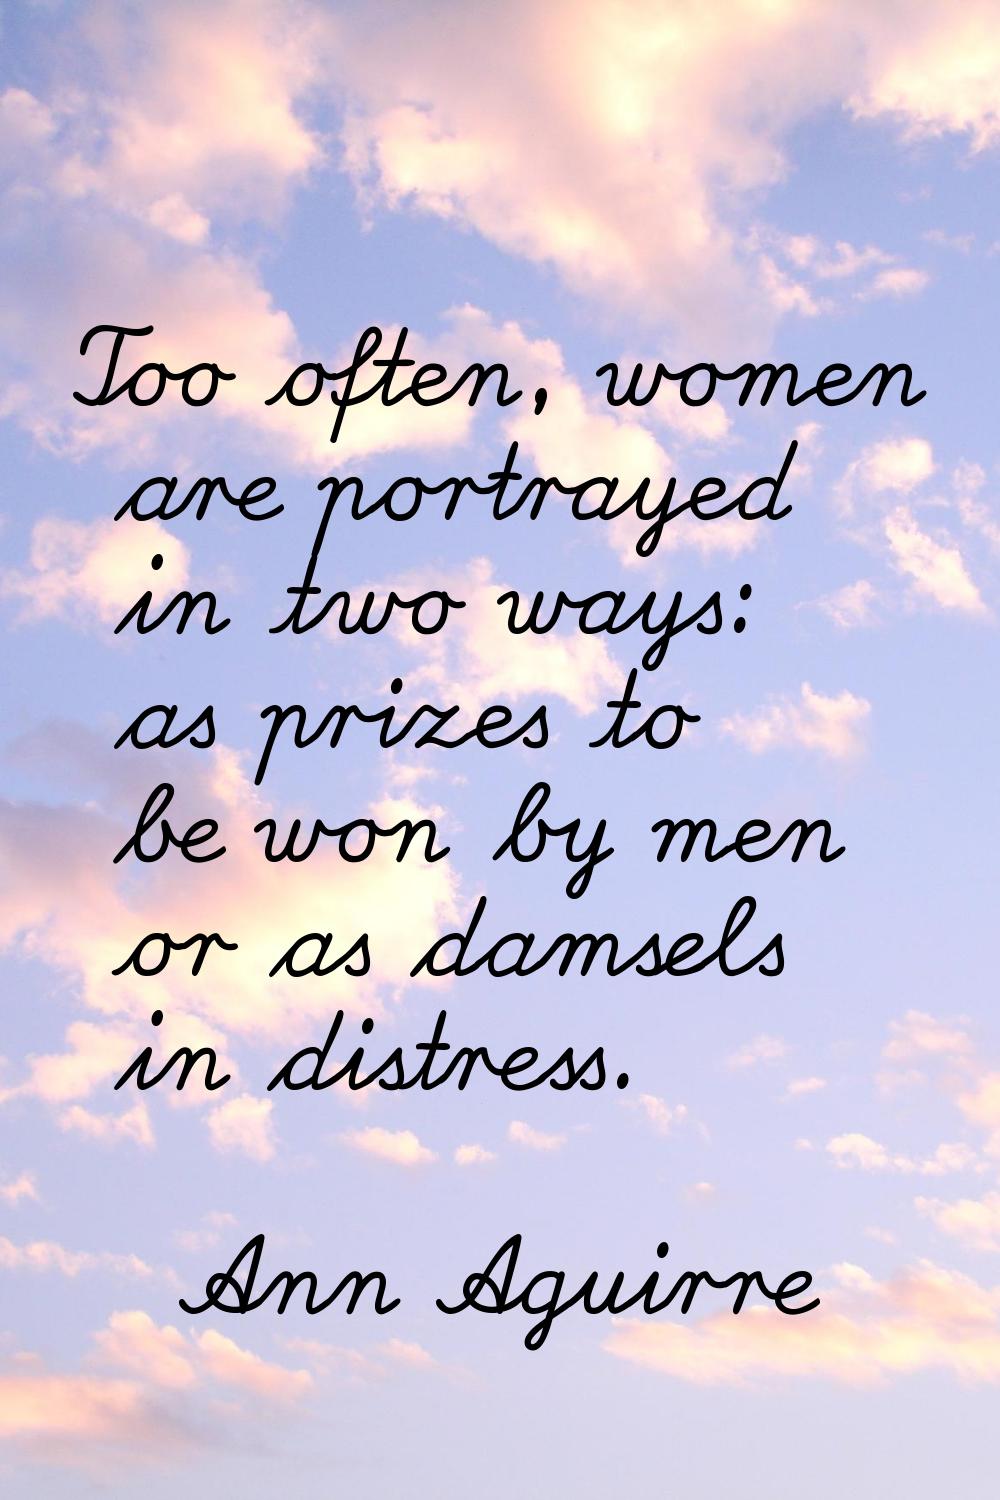 Too often, women are portrayed in two ways: as prizes to be won by men or as damsels in distress.